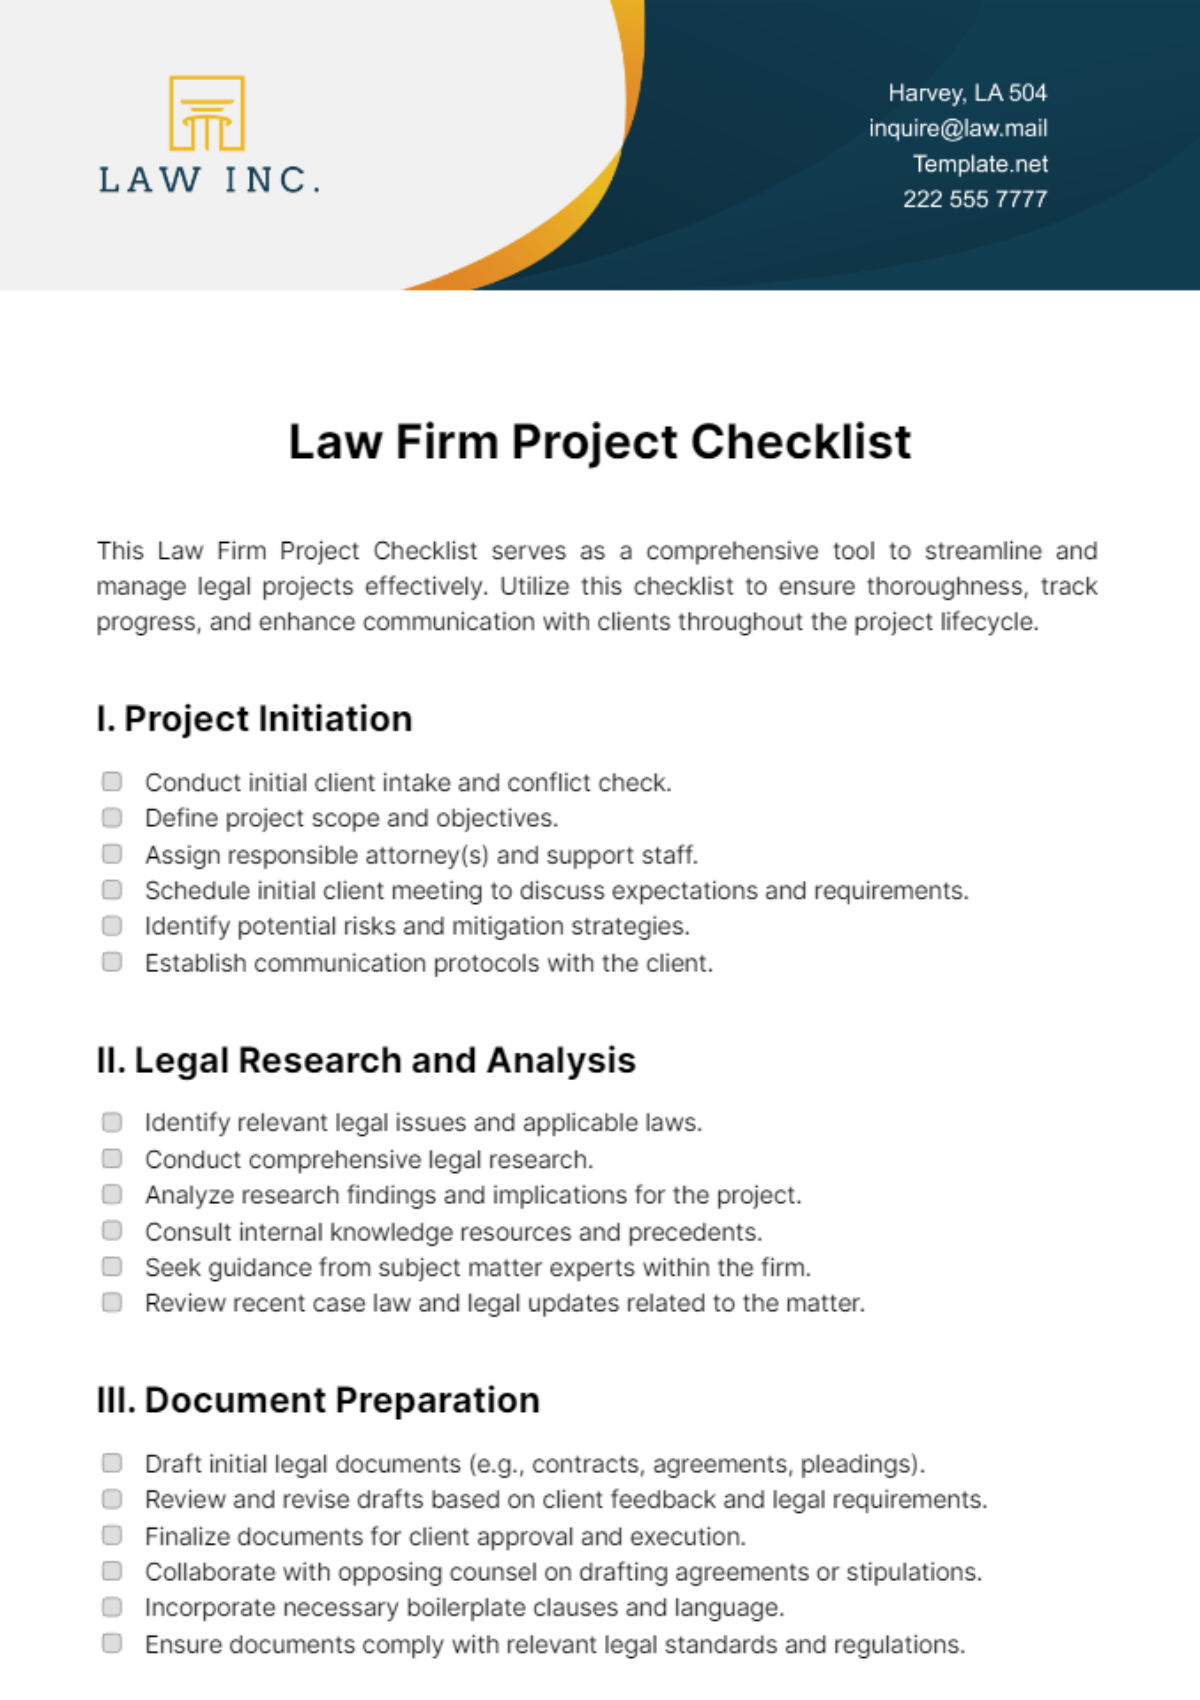 Law Firm Project Checklist Template